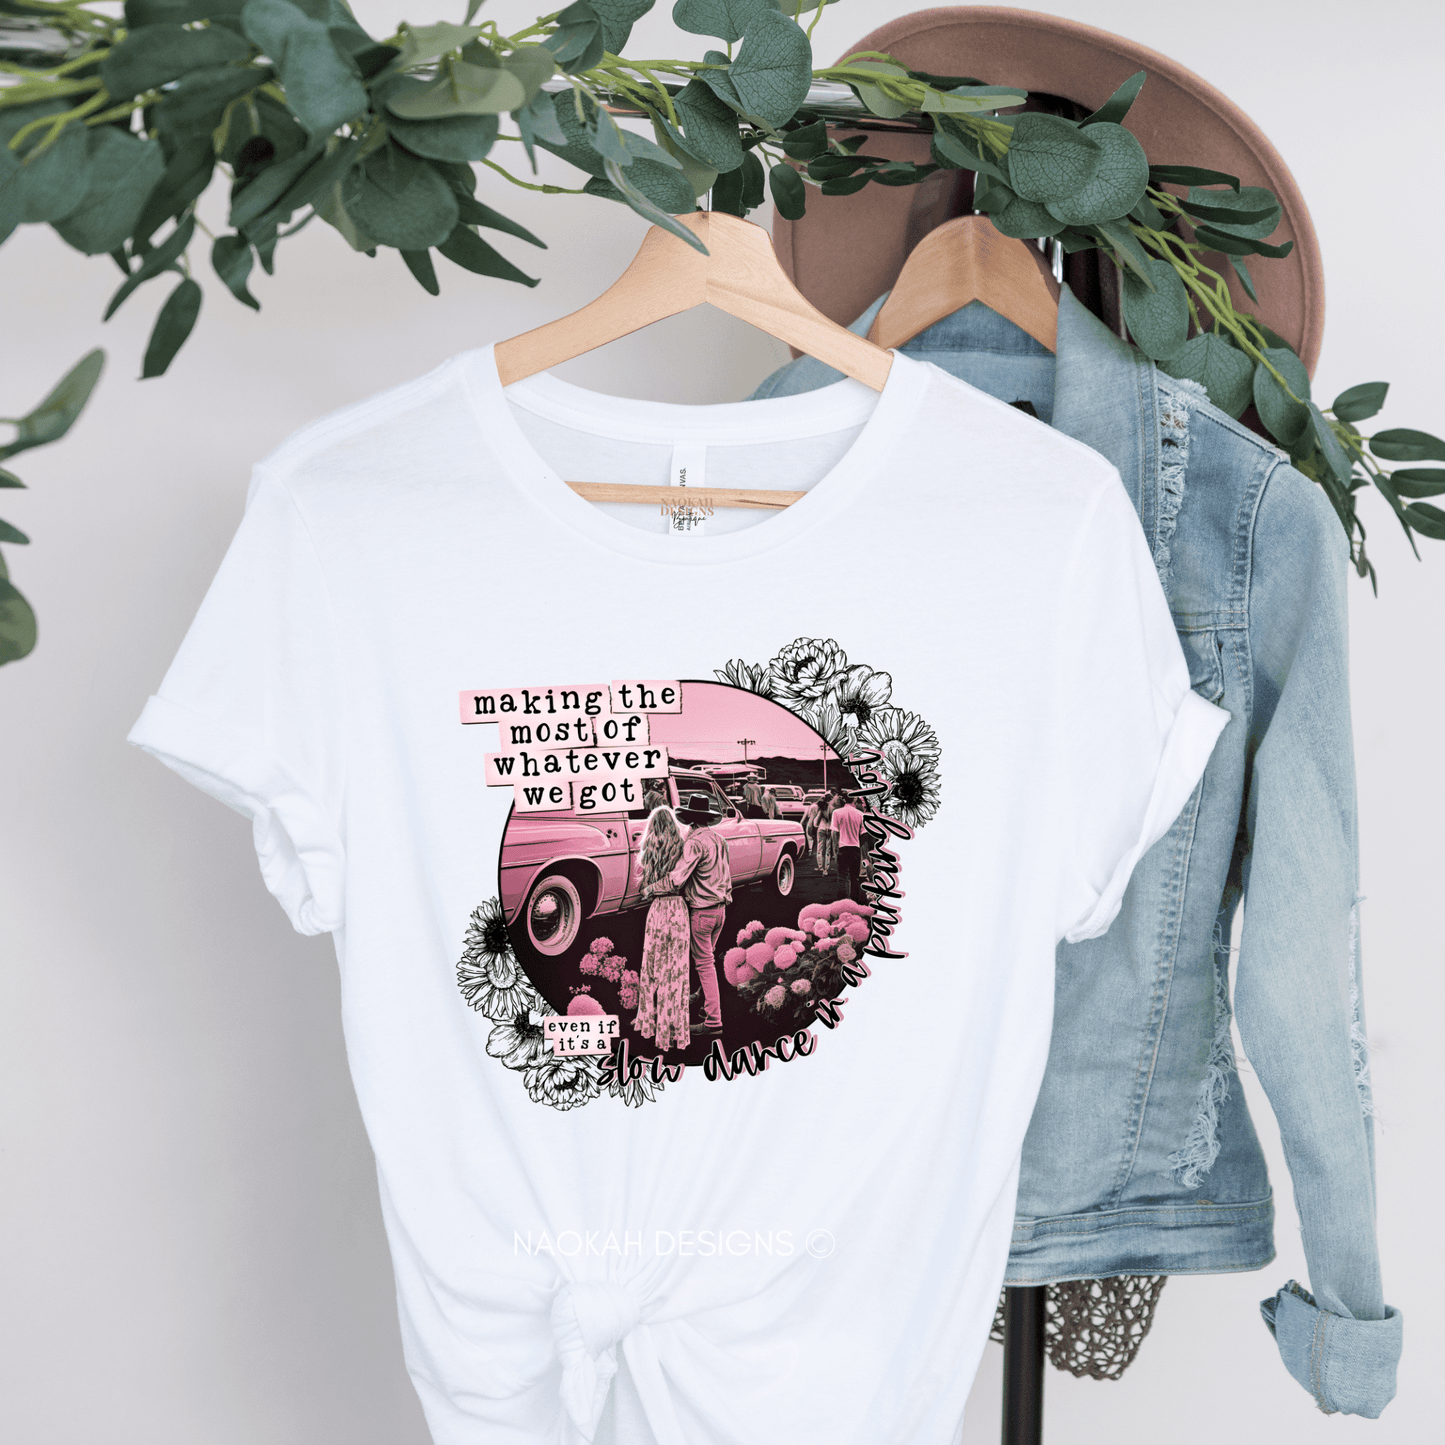 Making The Most Of Whatever We Got Shirt, Even If It's A Slow Dance In A Parking Lot, Boho Cowgirl Shirt, Boho Western Shirt, Cowgirl Shirt